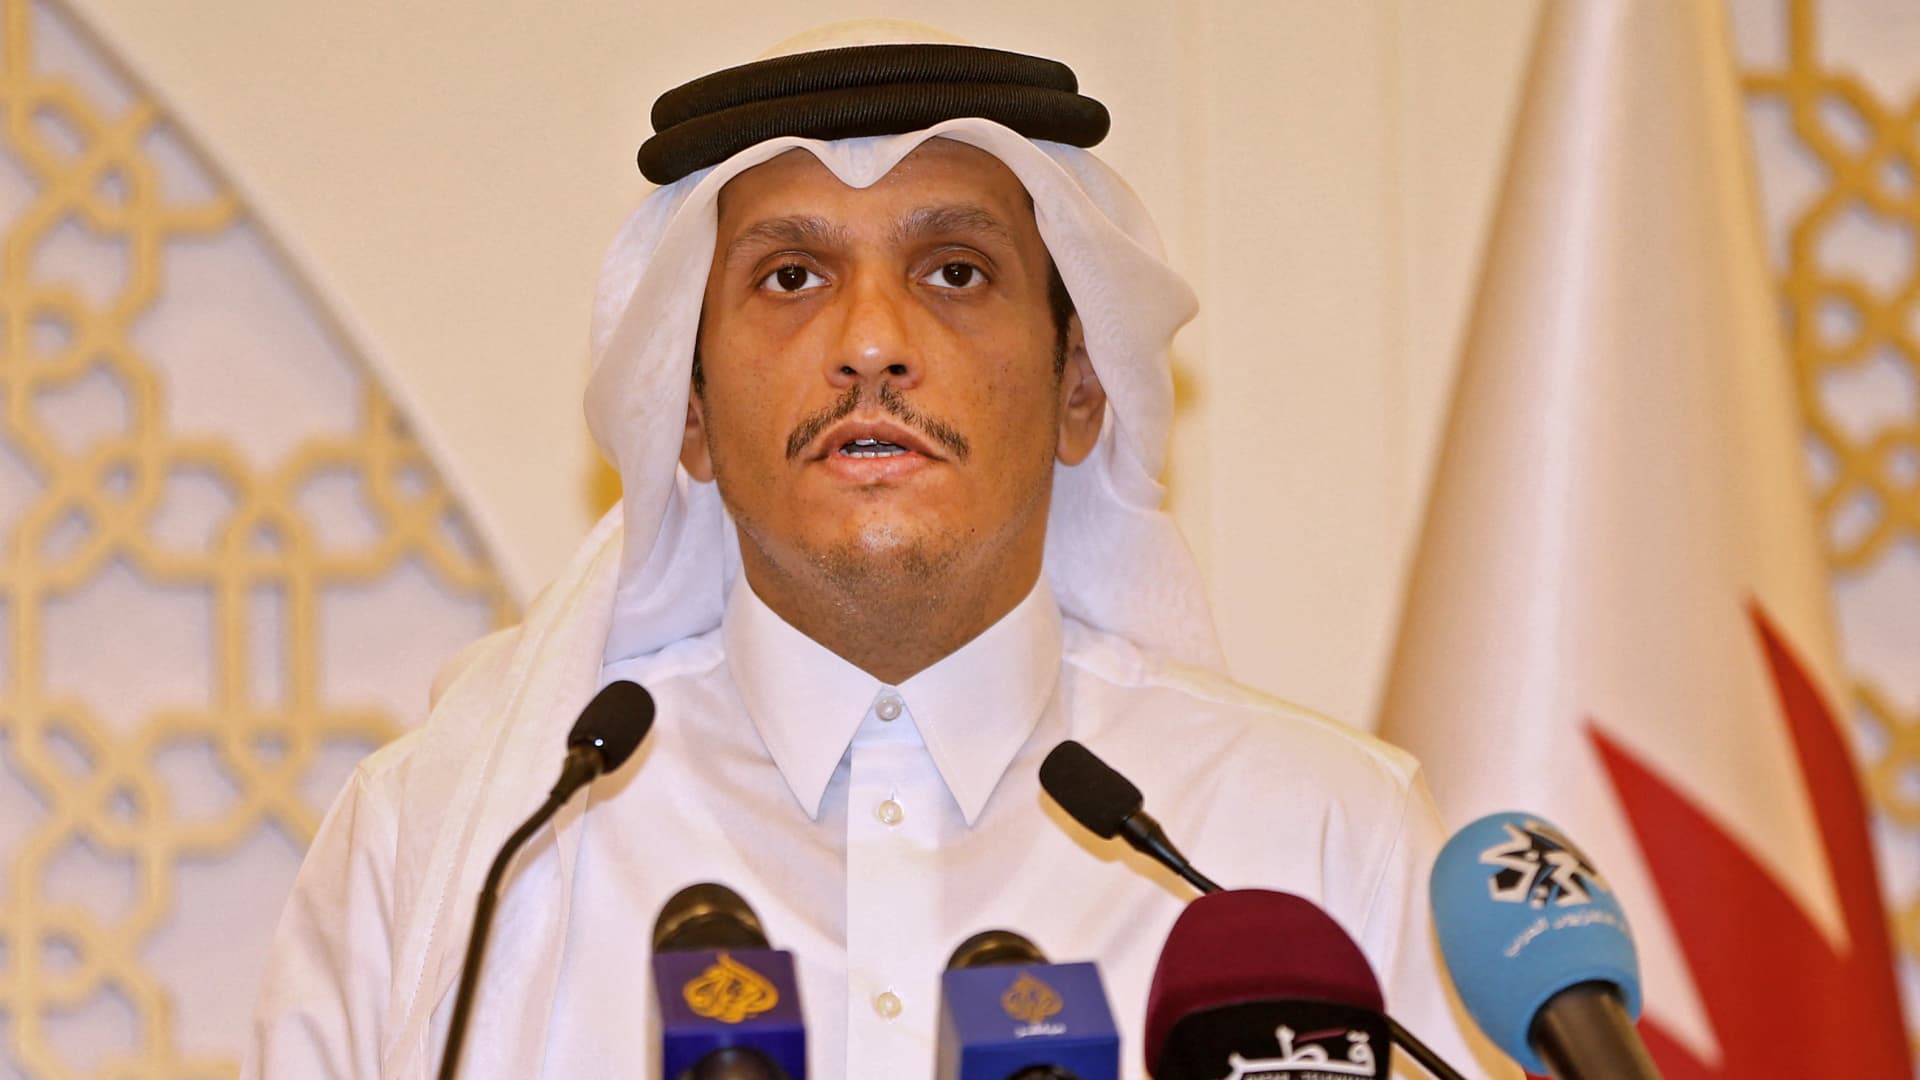 Qatar does not advocate 'forgive and forget' for Russia, foreign minister says after colleague's controversial remarks